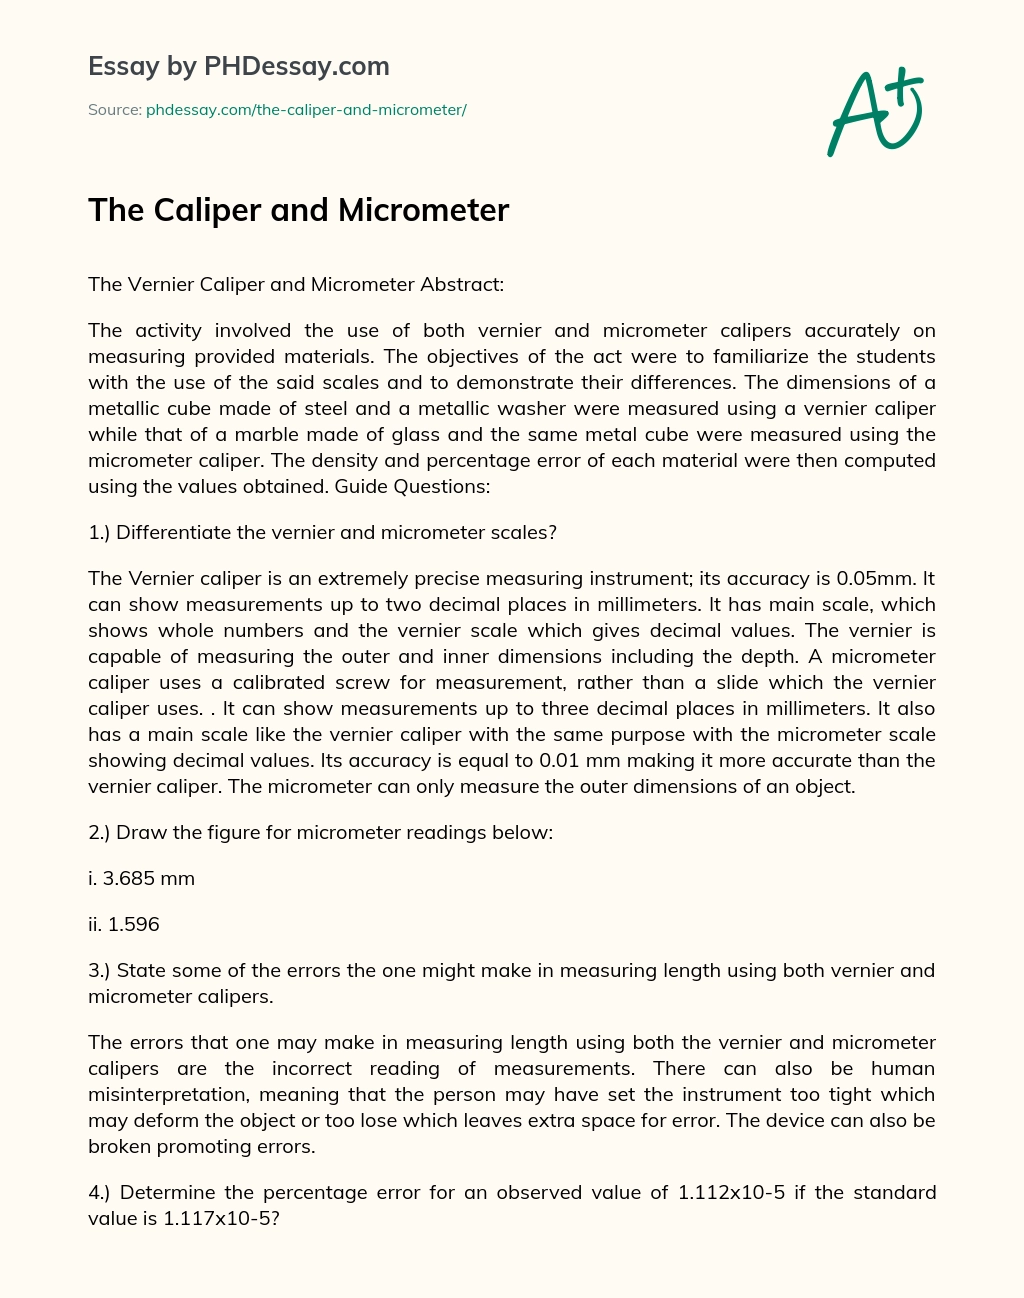 The Caliper and Micrometer essay